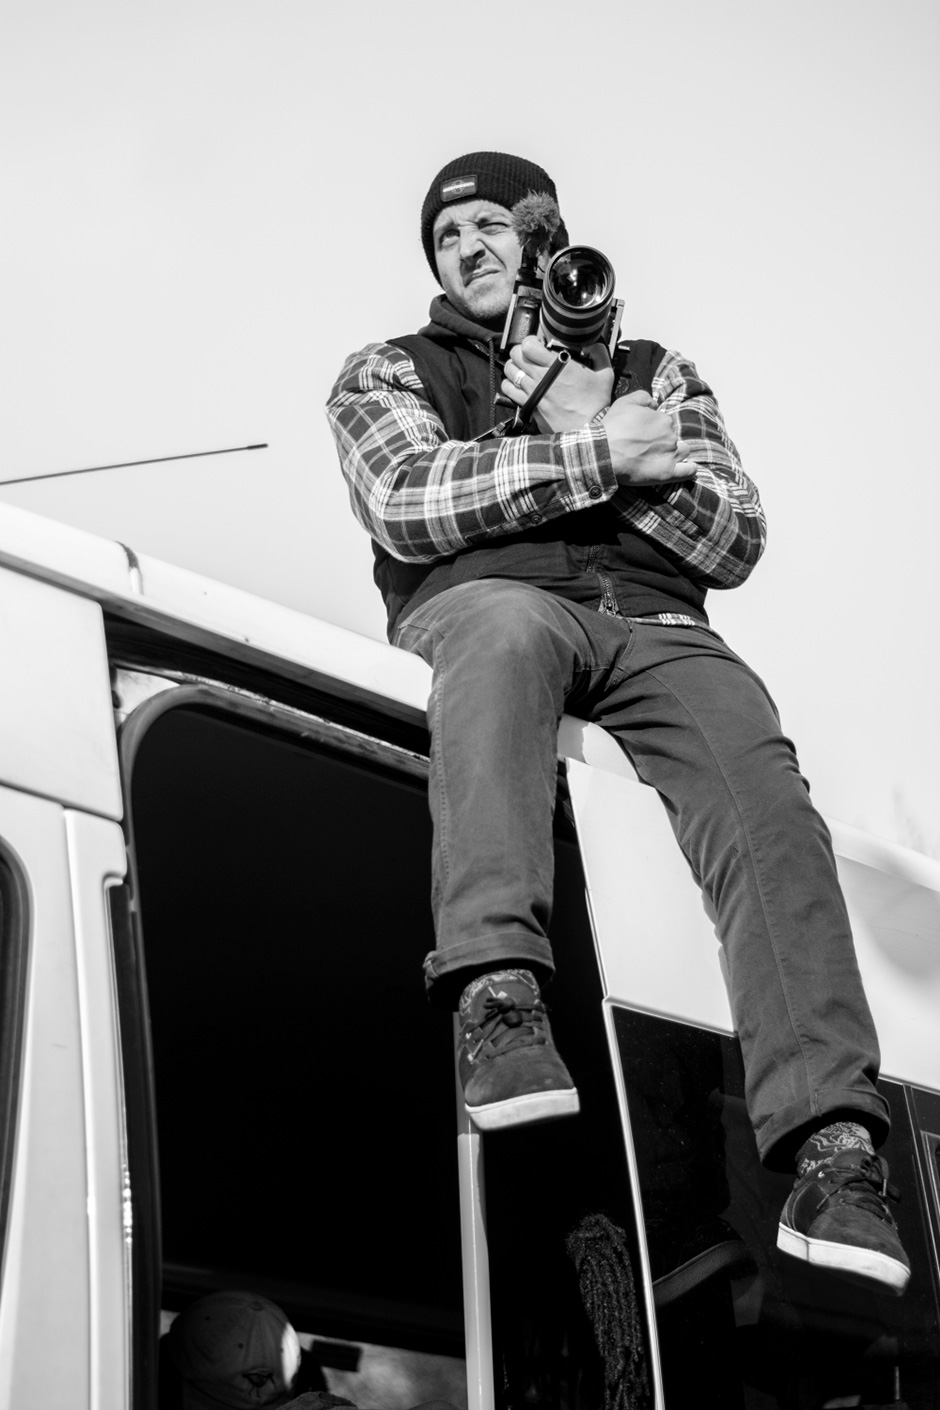 Kev on top of the van while filming for Cover Version. PH: Korahn Gayle